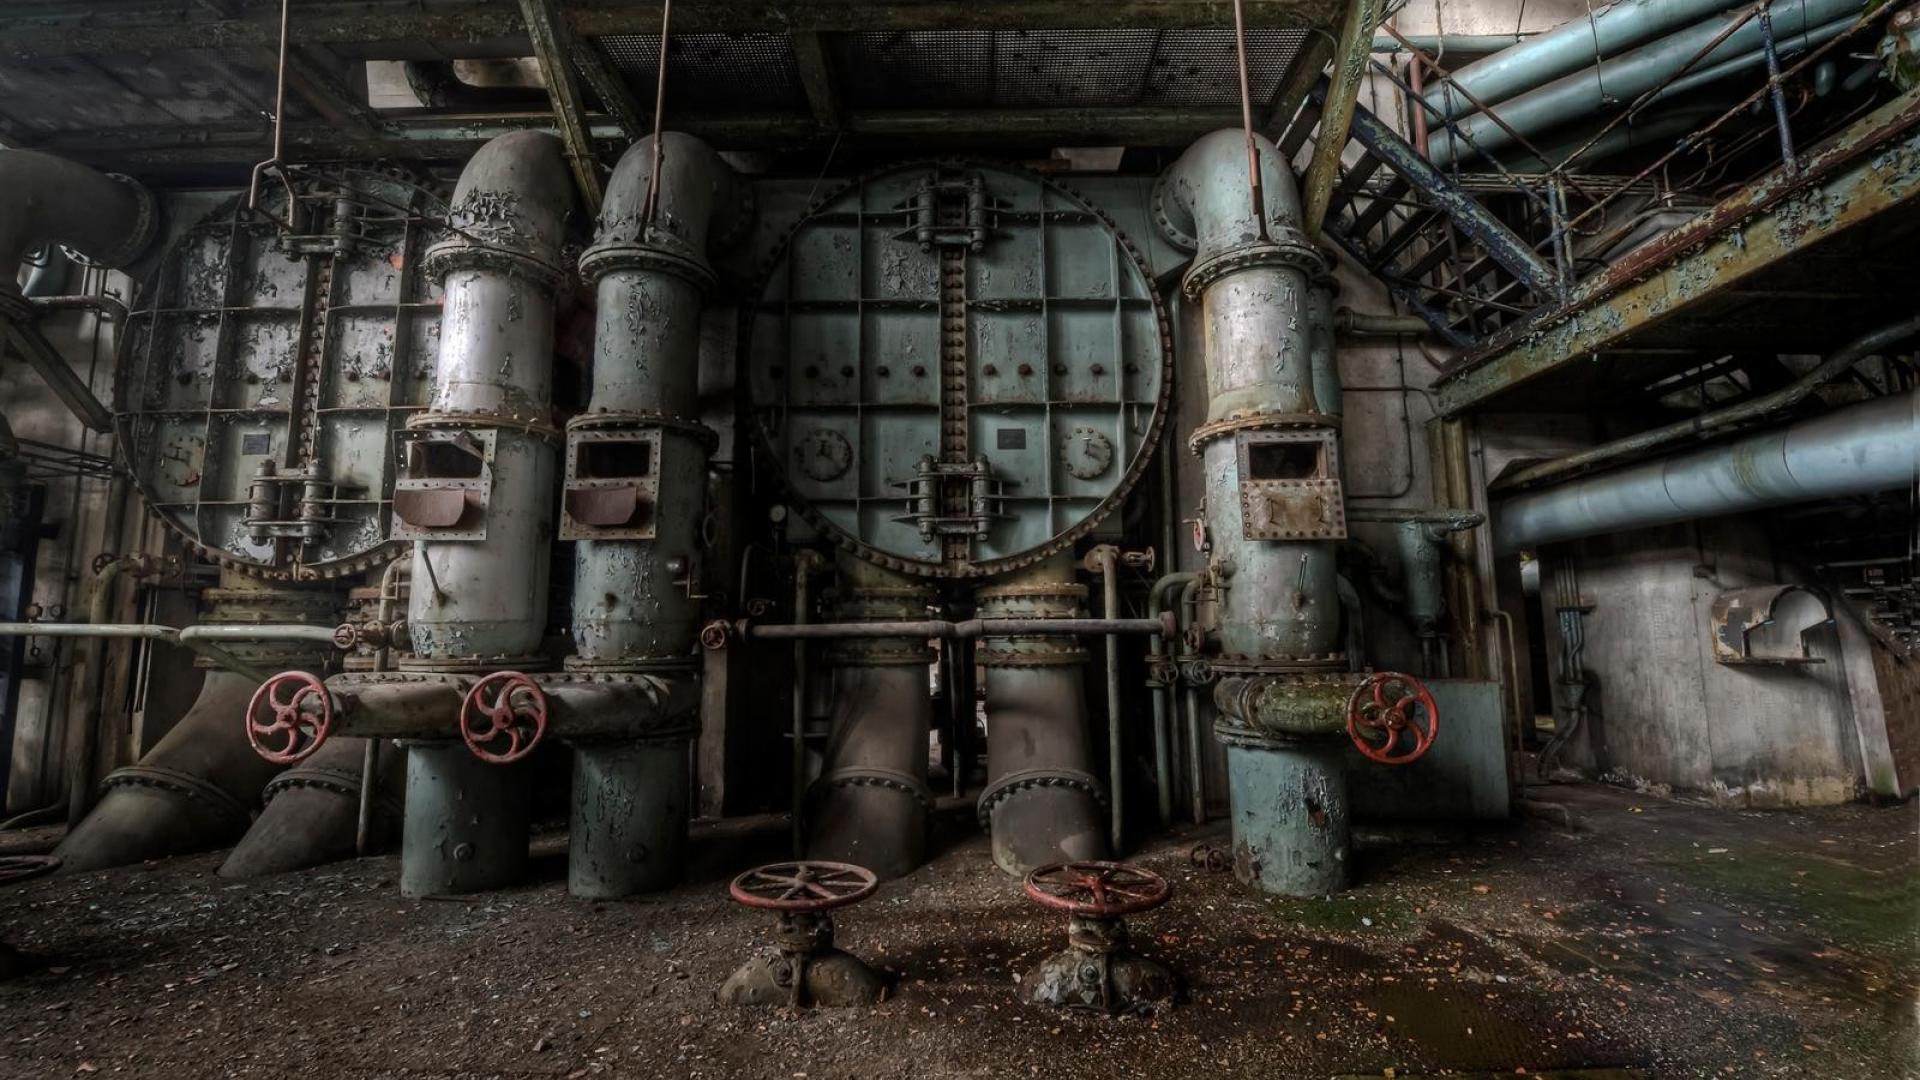 Free download Cityscapes europe machinery abandoned factory wallpaper [1920x1080] for your Desktop, Mobile & Tablet. Explore Machinery Wallpaper. Machinery Wallpaper